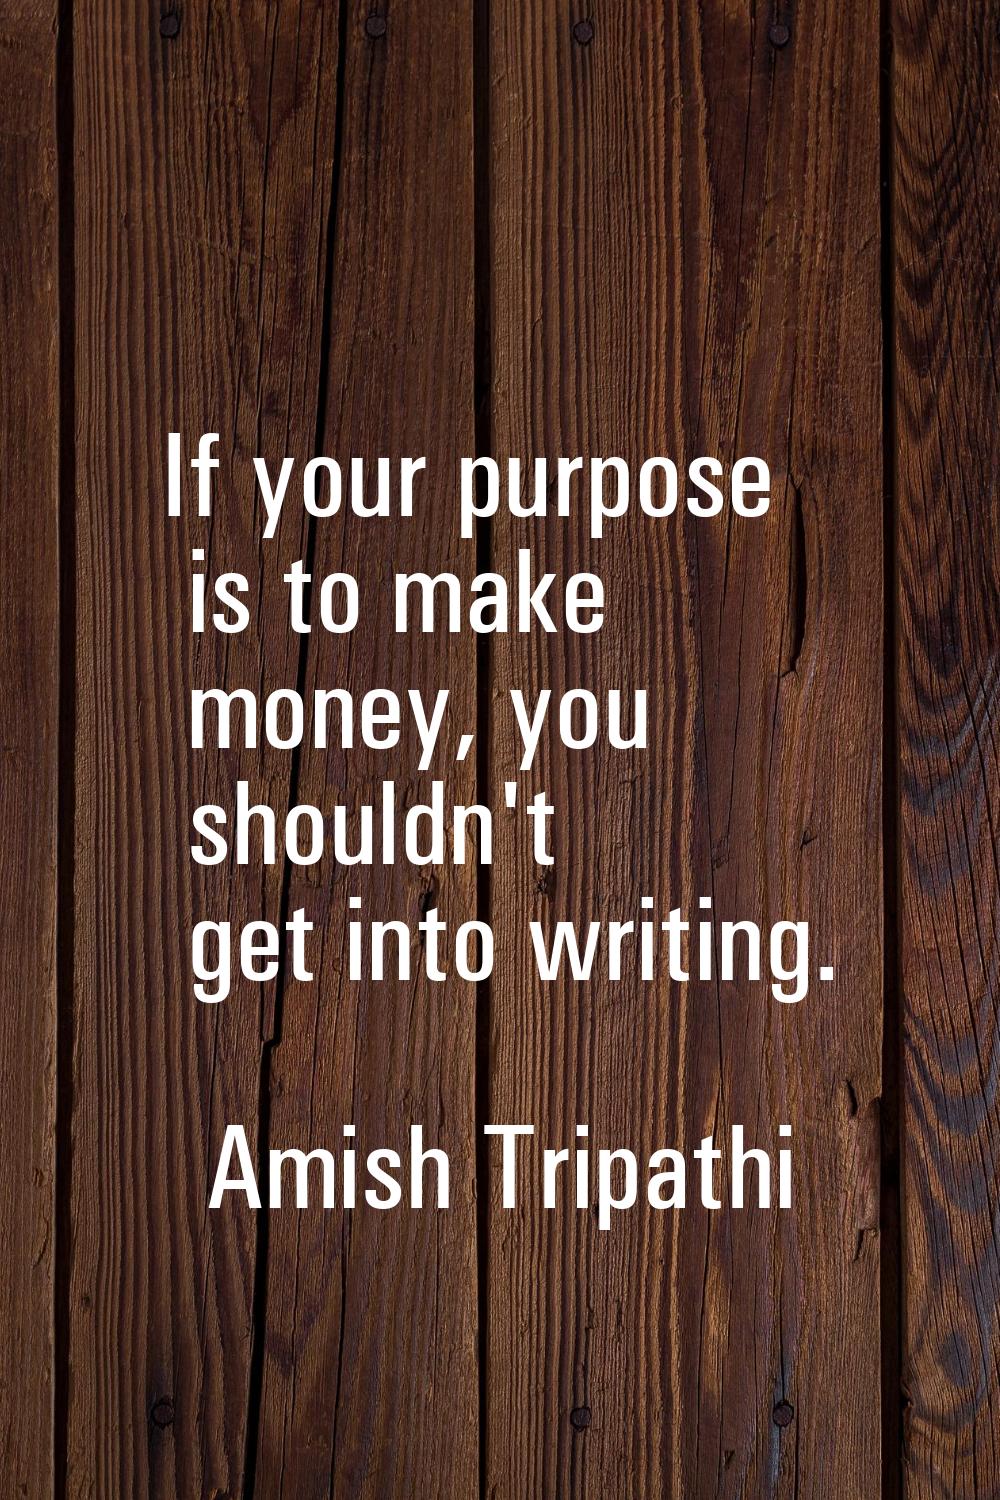 If your purpose is to make money, you shouldn't get into writing.